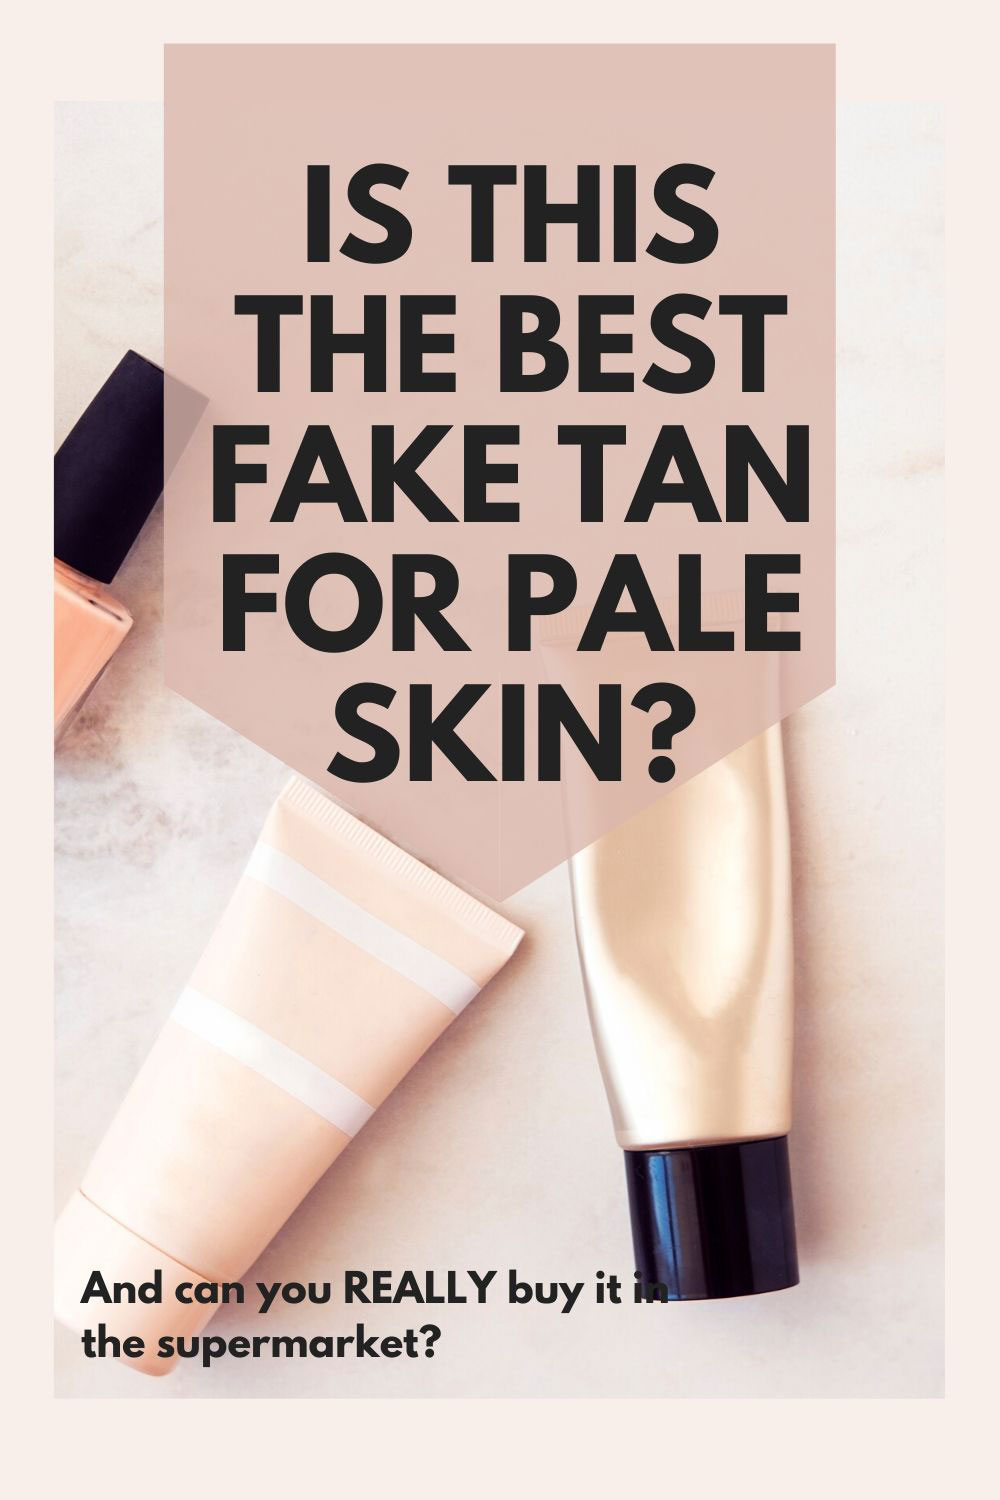 Is this the best fake tan for pale skin?